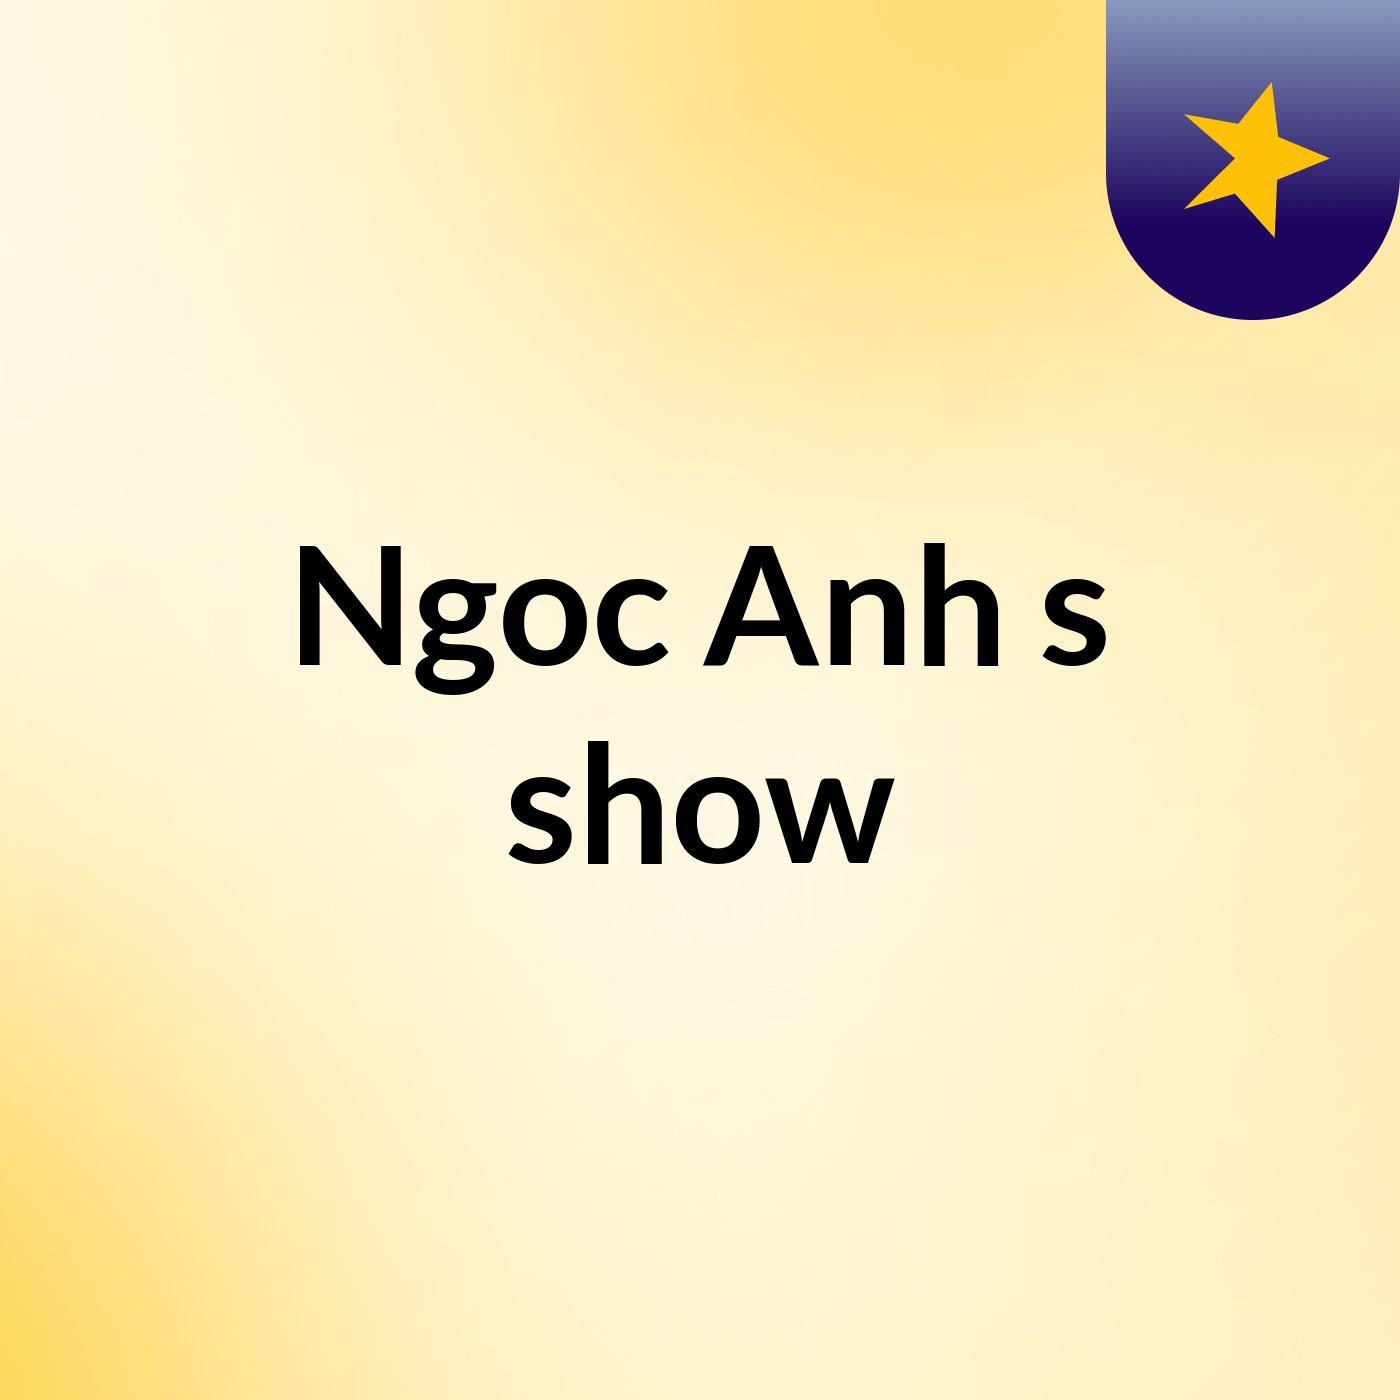 Ngoc Anh's show